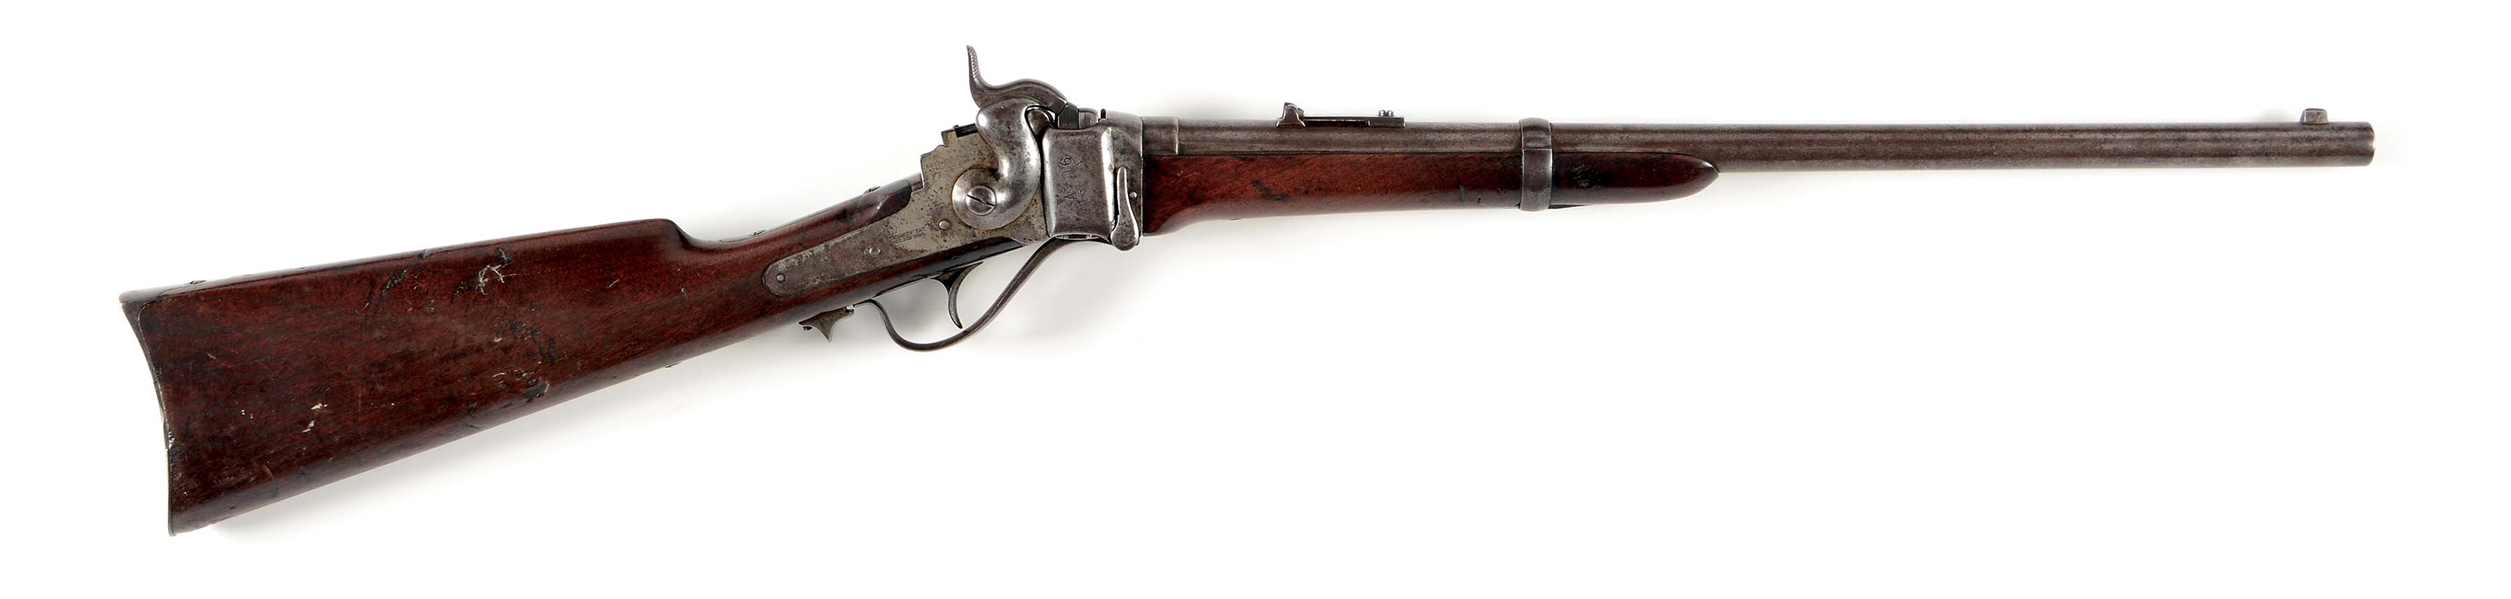 (A) TEXAS CAVALRY MARKED US SHARPS MODEL 1868 CONVERSION BREECHLOADING CARBINE.